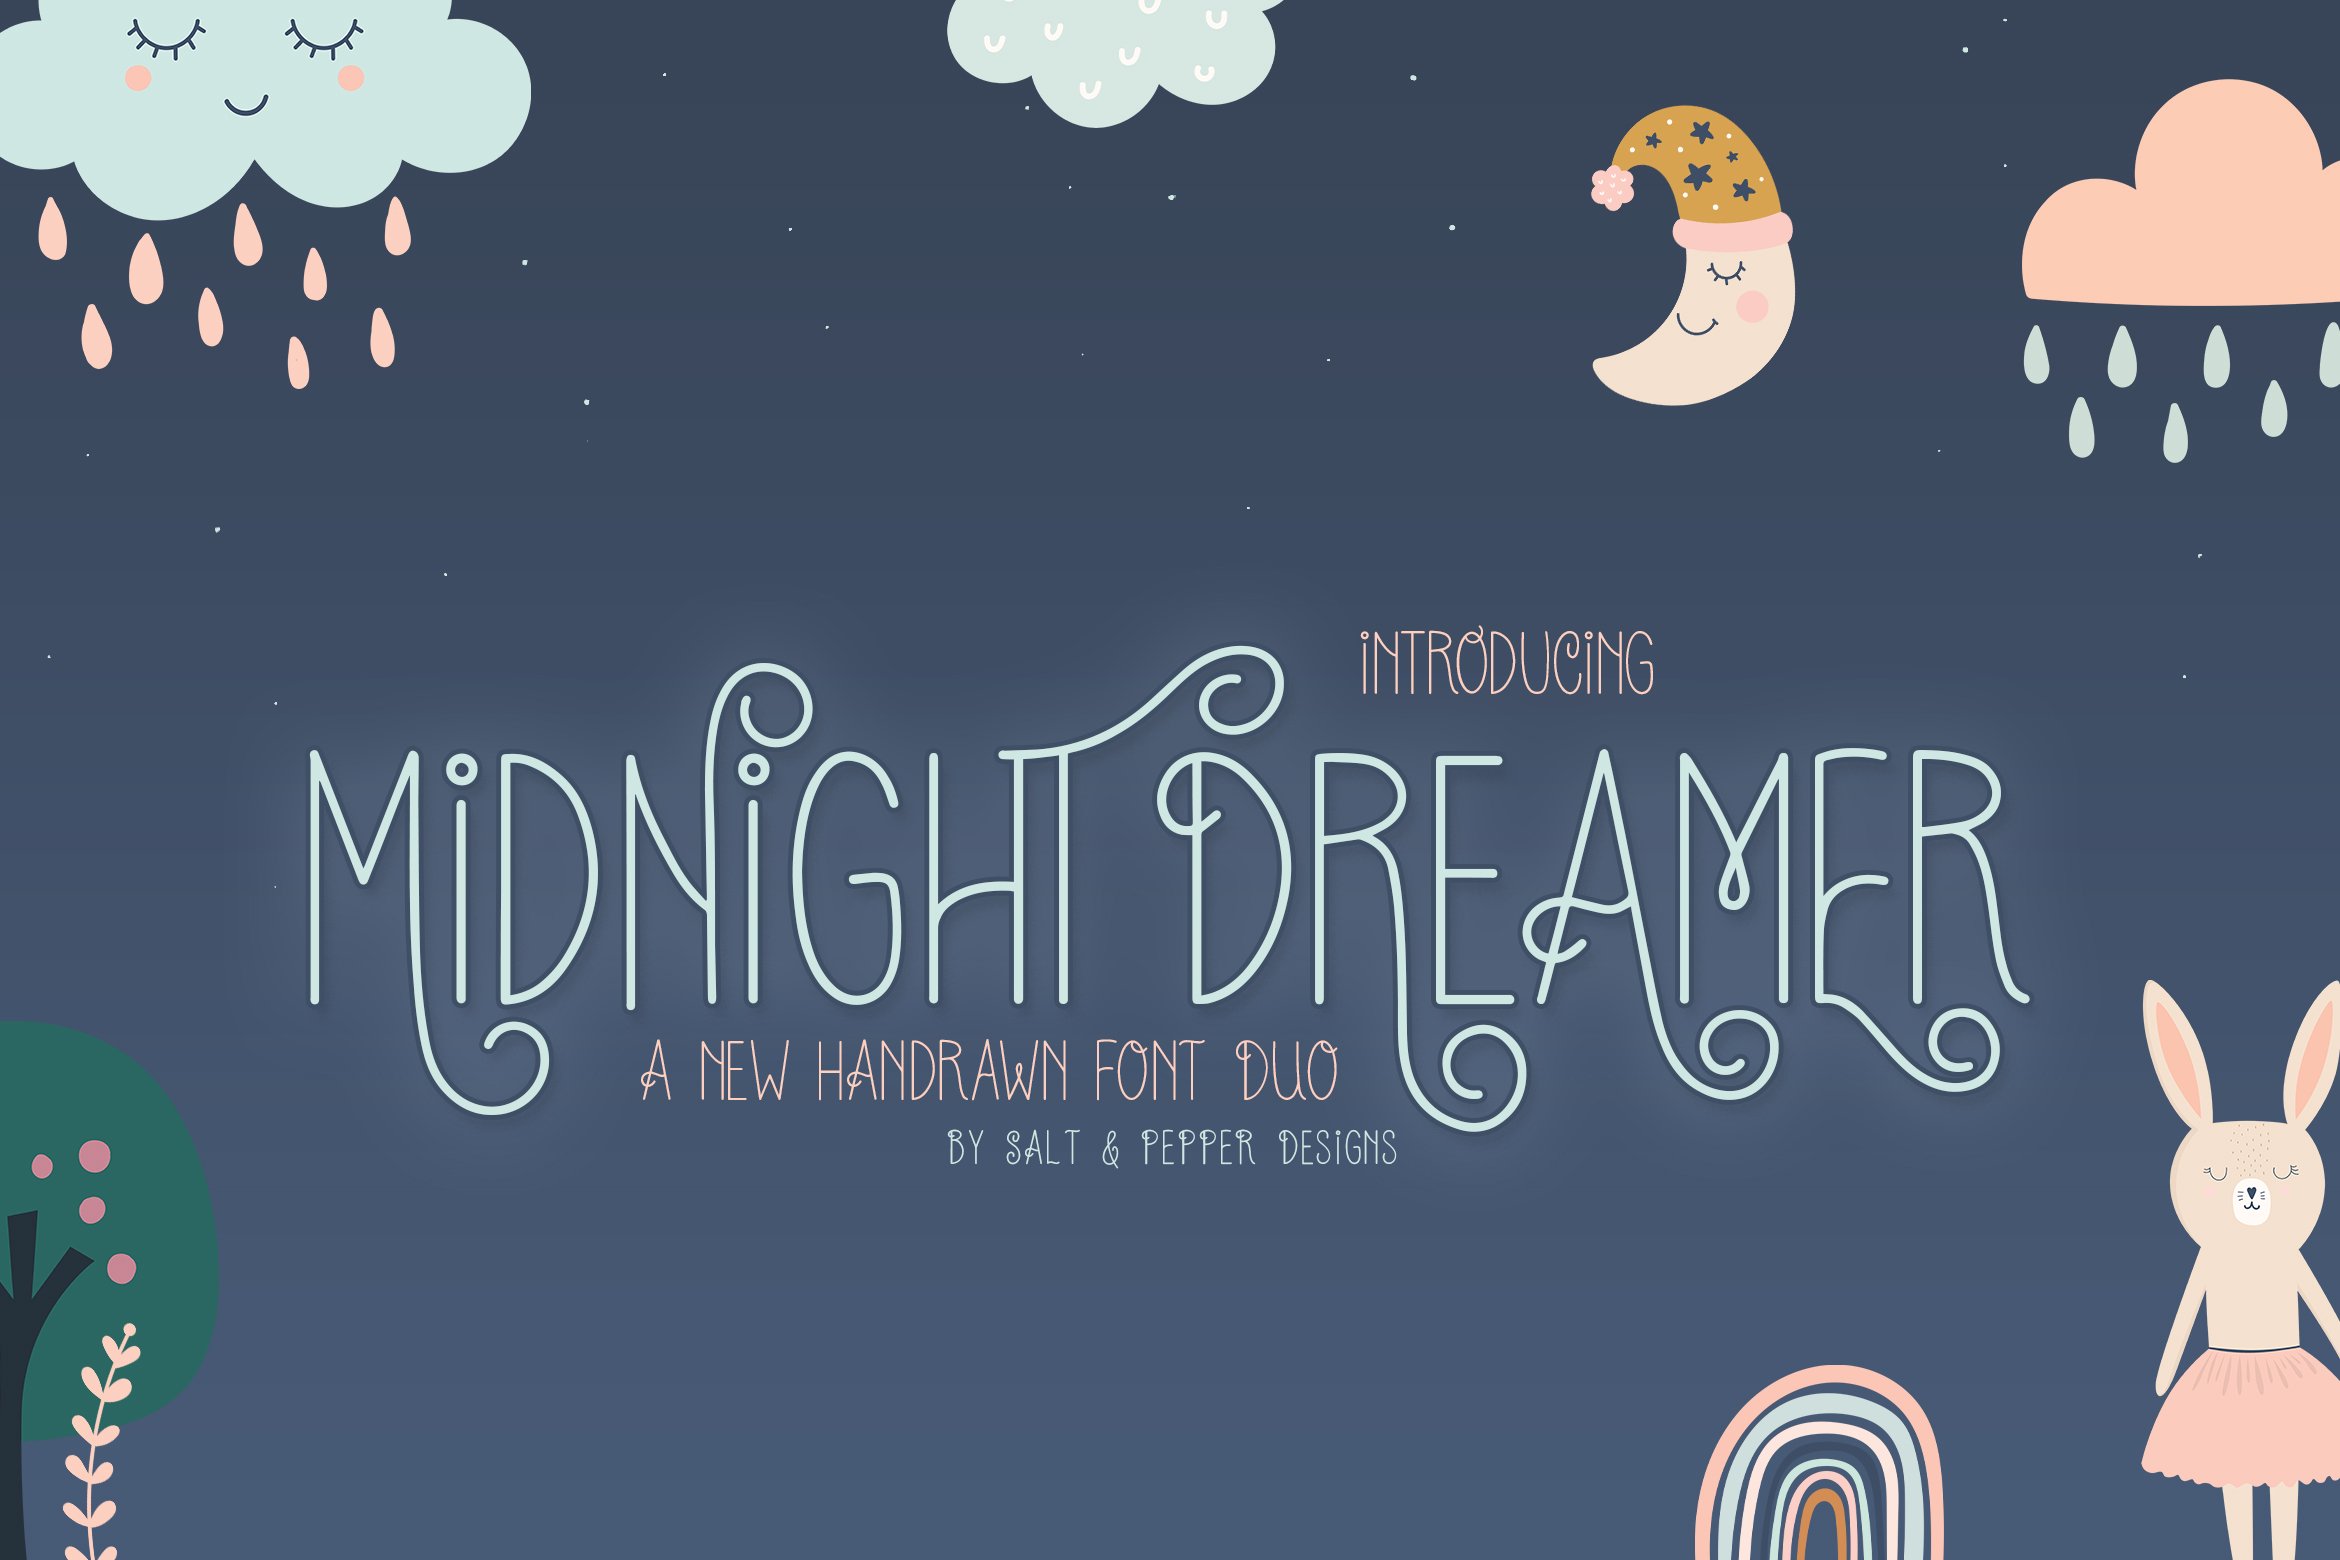 Midnight Dreamer Font cover image.